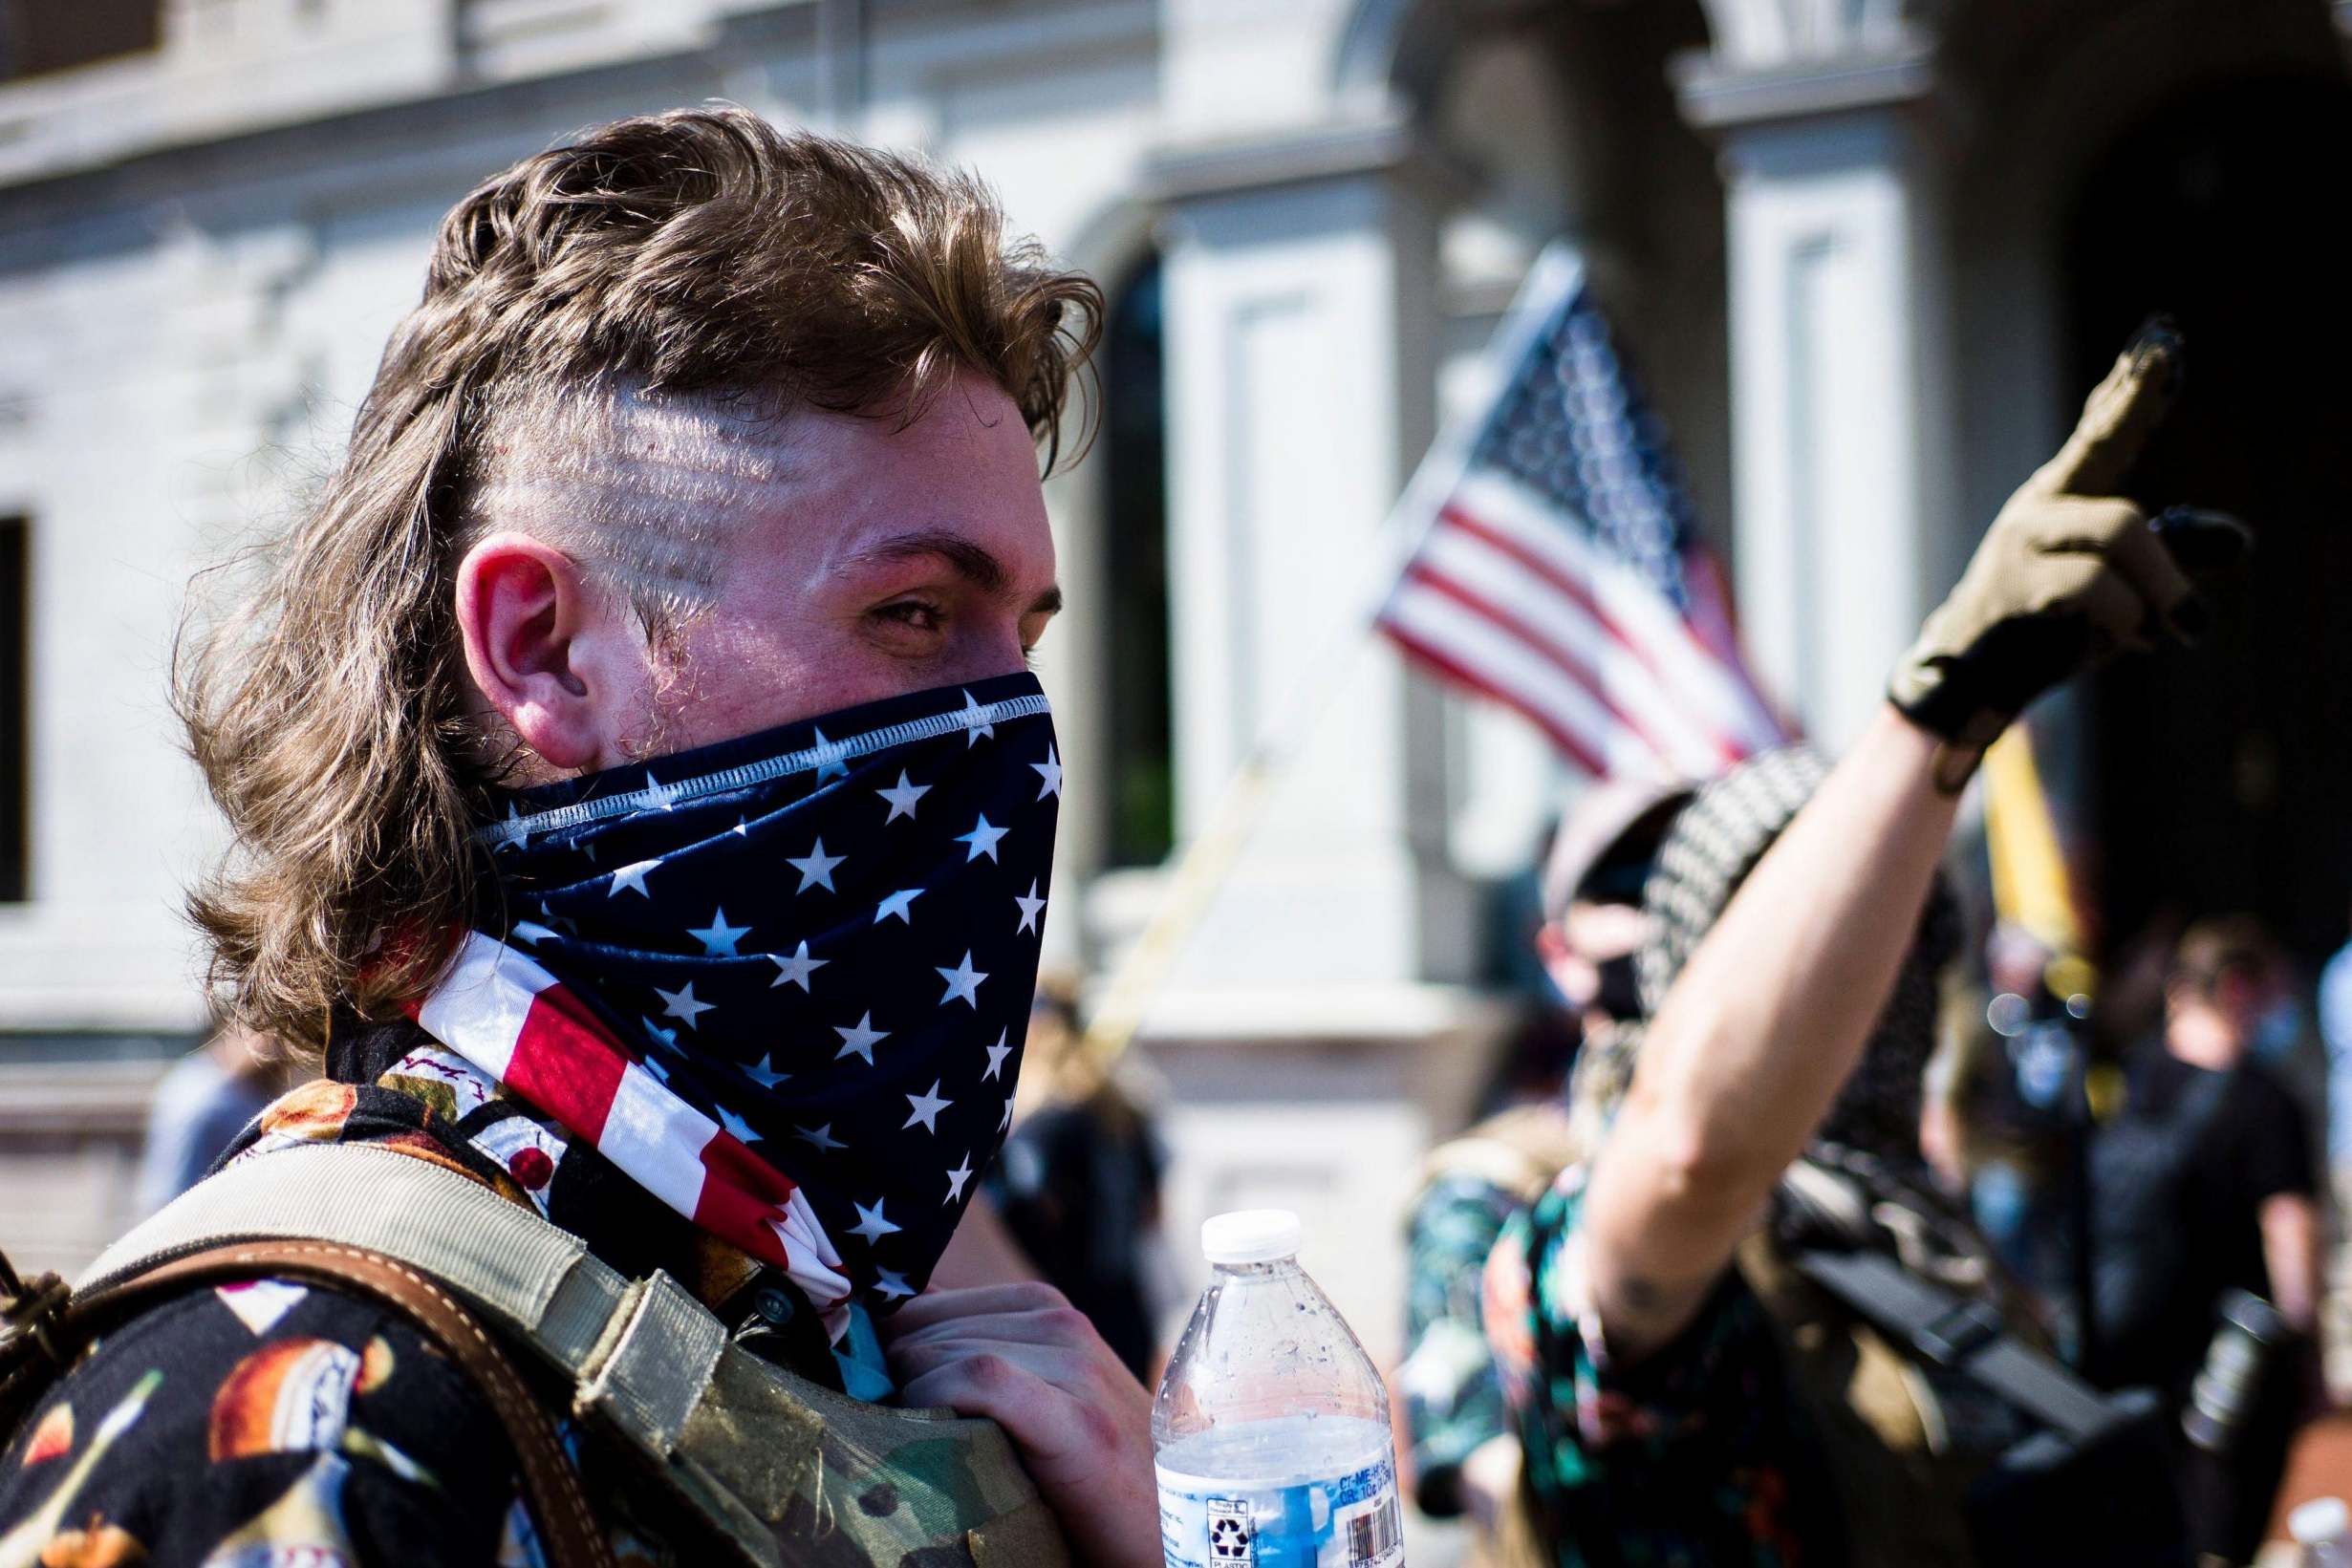 A Booglaoo Boi during the Red Flag Law Protest near Capitol Square in Richmond, Virginia, earlier this month